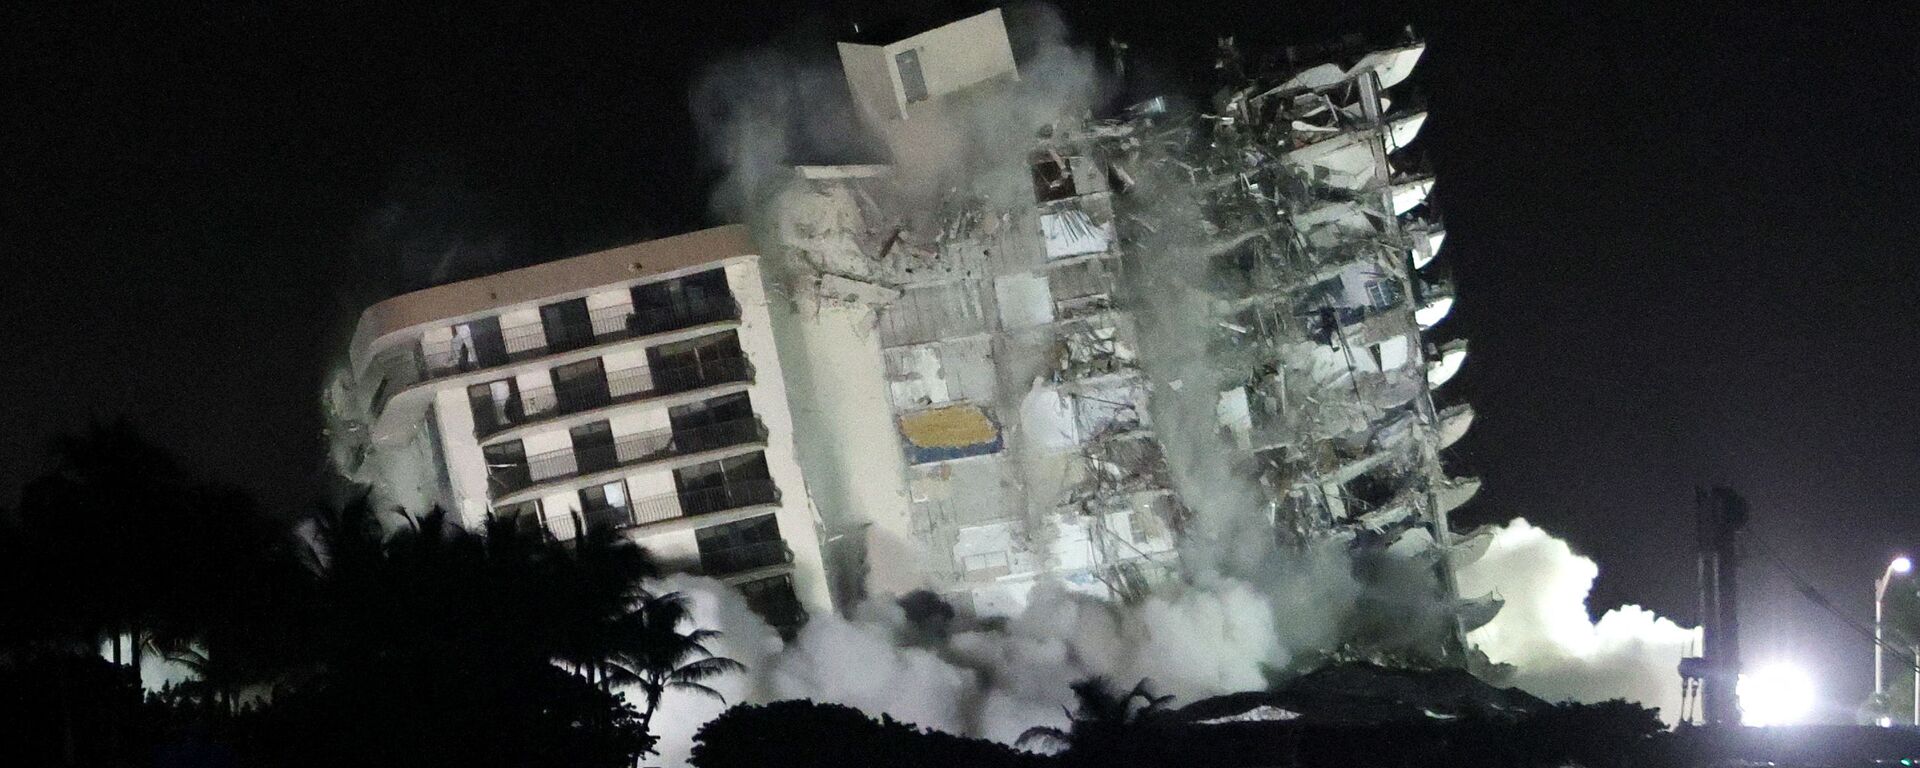 The remaining part of the partially collapsed 12-story Champlain Towers South condo building falls with a controlled demolition on 4 July 2021 in Surfside, Florida. The decision by officials to bring the rest of the building down was brought on by the approach of Tropical Storm Elsa and fears that the structure might come down in an uncontrolled fashion. Over one hundred people are missing as the search-and-rescue effort continues. - Sputnik International, 1920, 04.08.2021